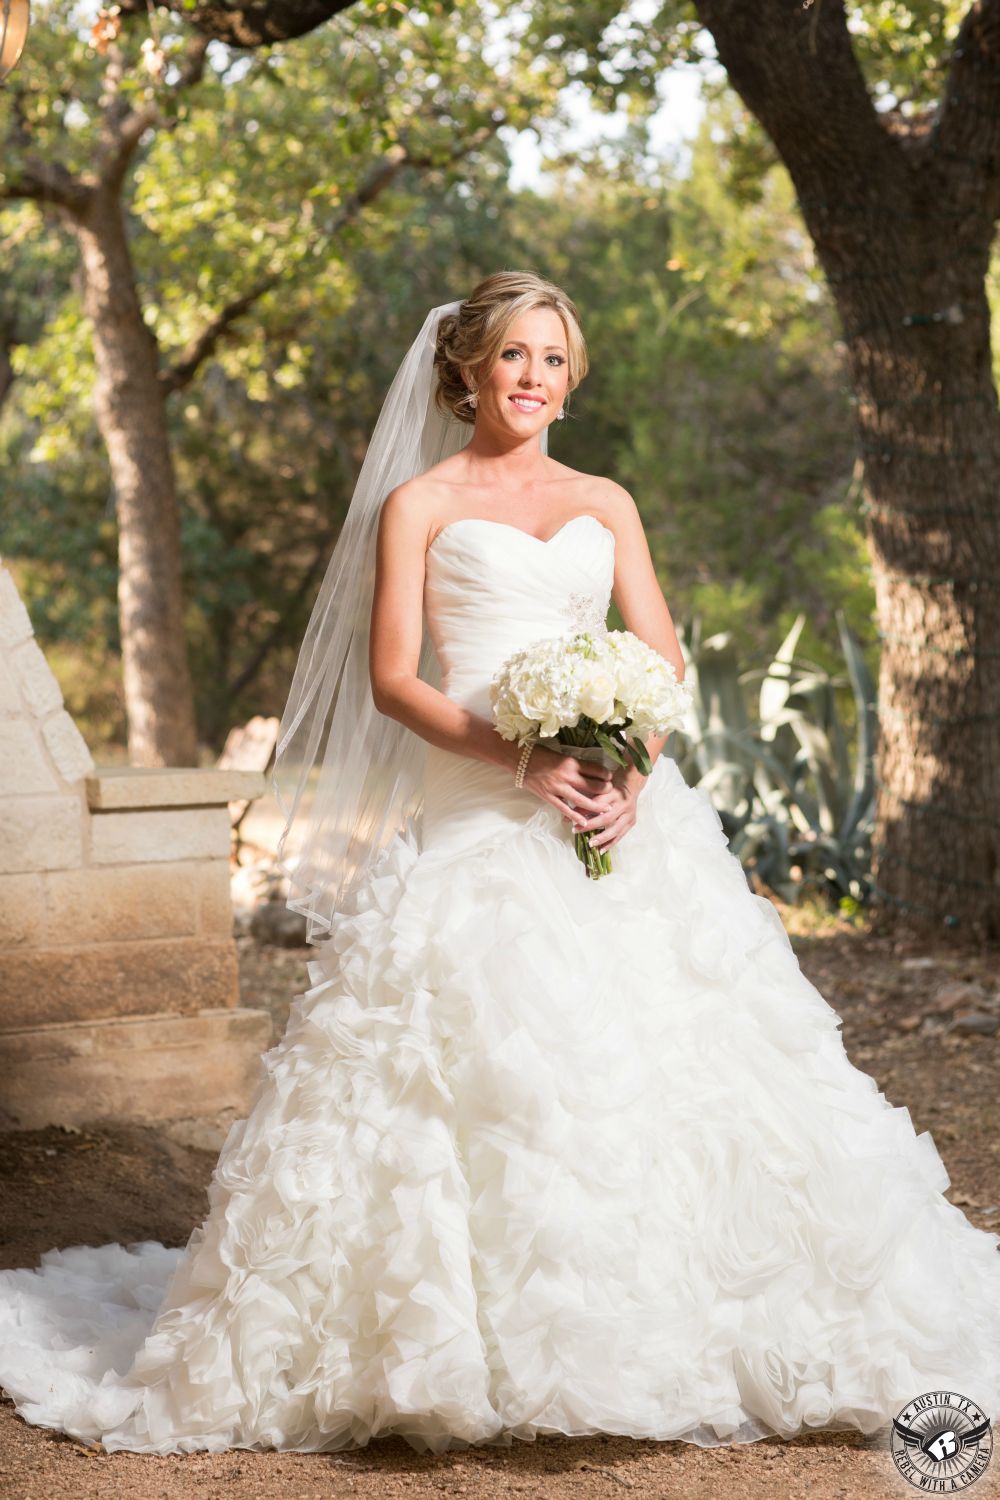 Stunning blonde bride in ruffled dress from Cloud 9 Bridal in Georgetown, Texas, and makeup by Maris Malone Calderon and hair styled by Jen Hoover of Pearl Studio in Austin with white bridal bouquet by Zuzu's Petals at Kindred Oaks Life Changing wedding venue in Central Texas.